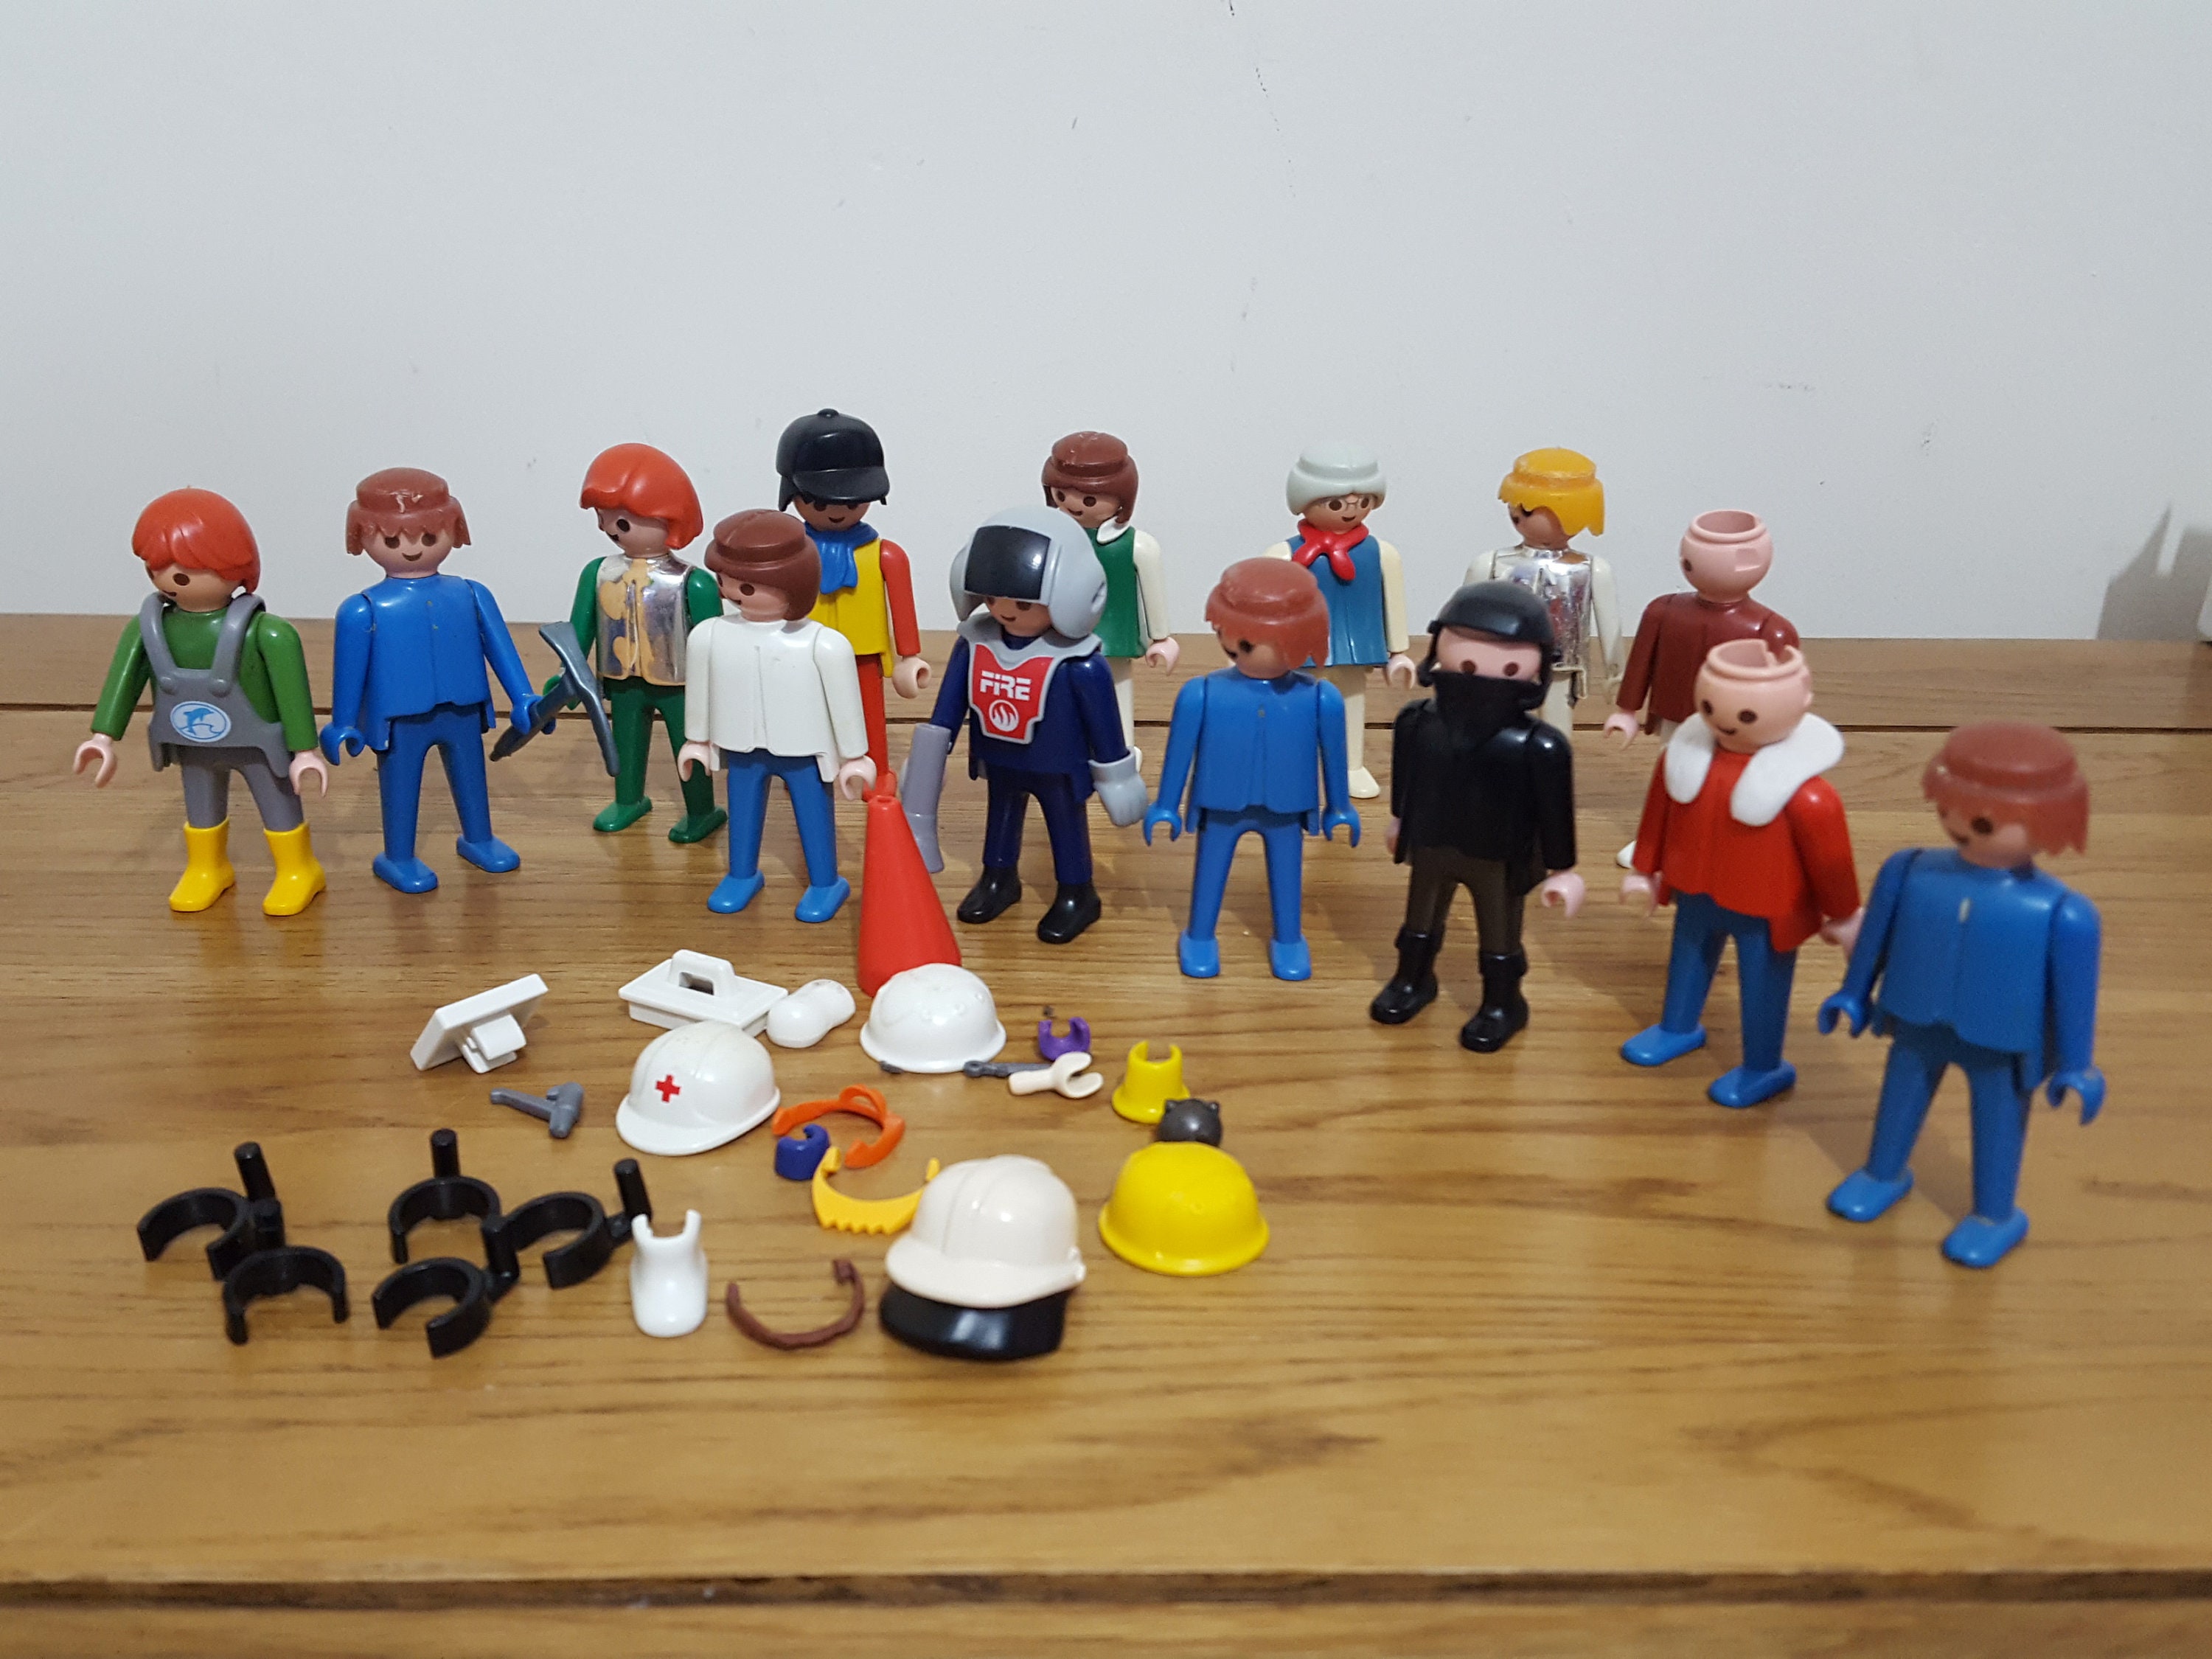 Vintage Playmobil People and Accessories - Etsy